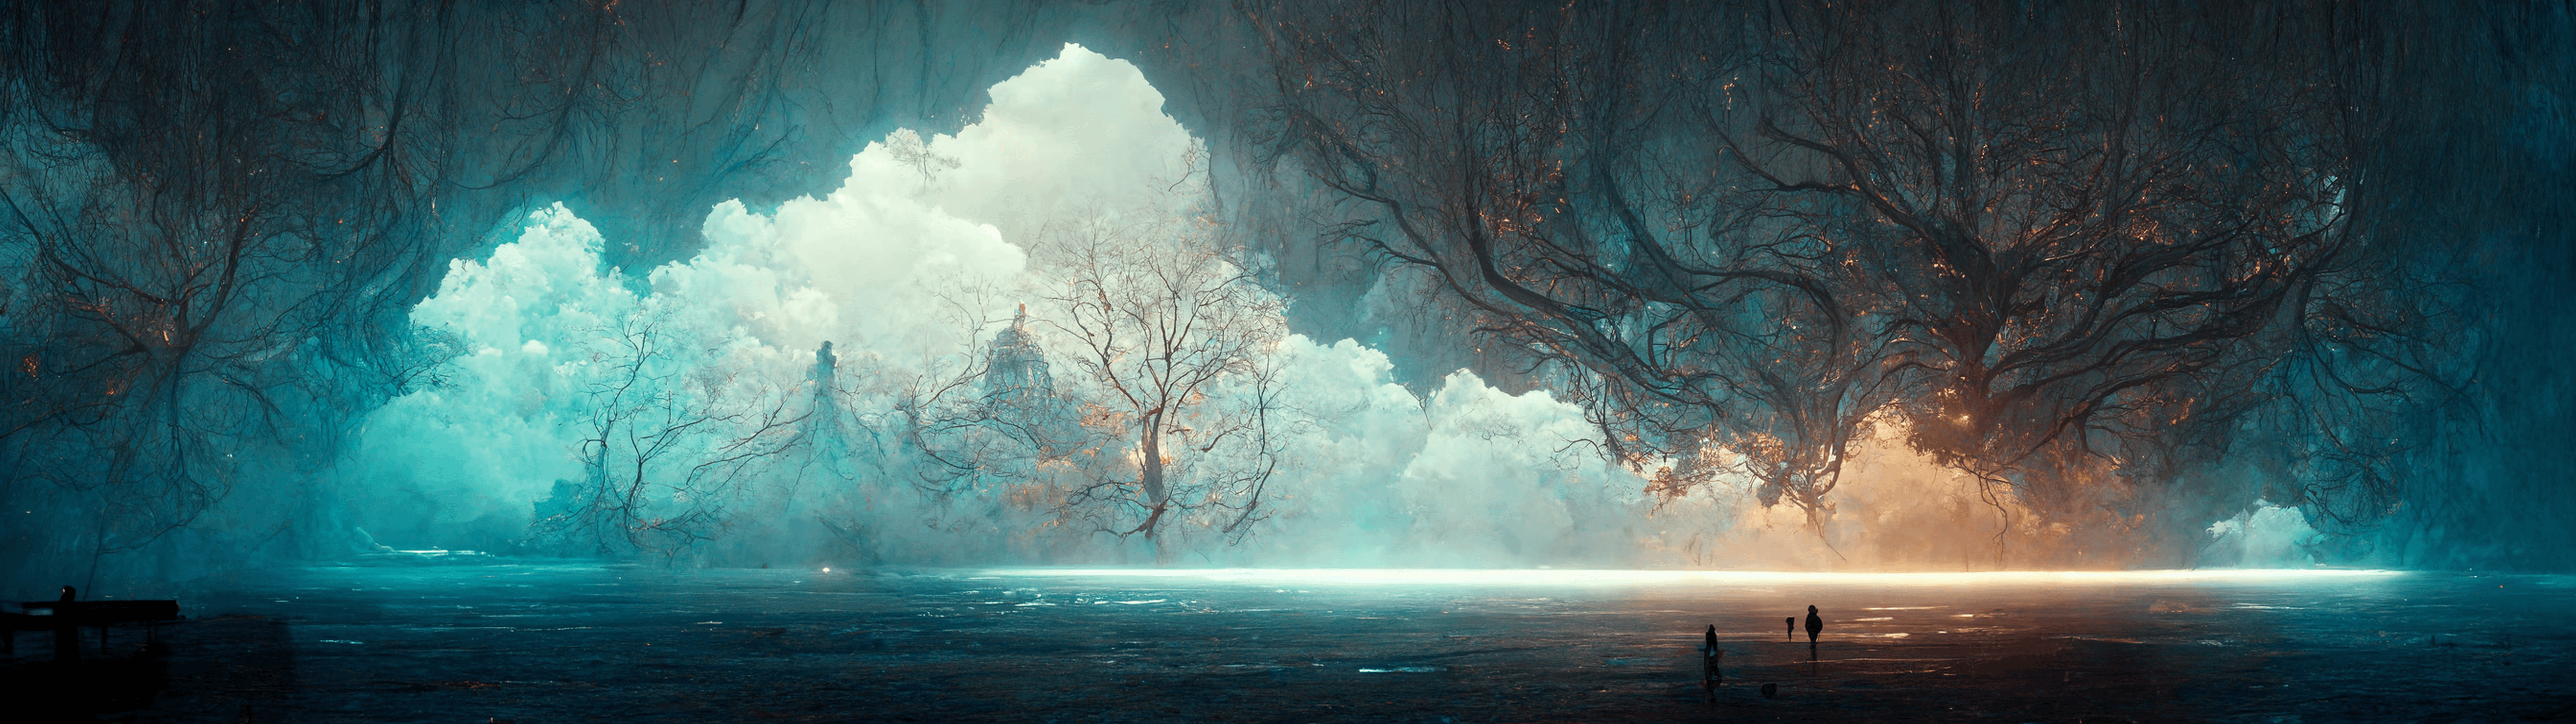 A digital painting of a misty forest with a glowing light at the end. - 5120x1440